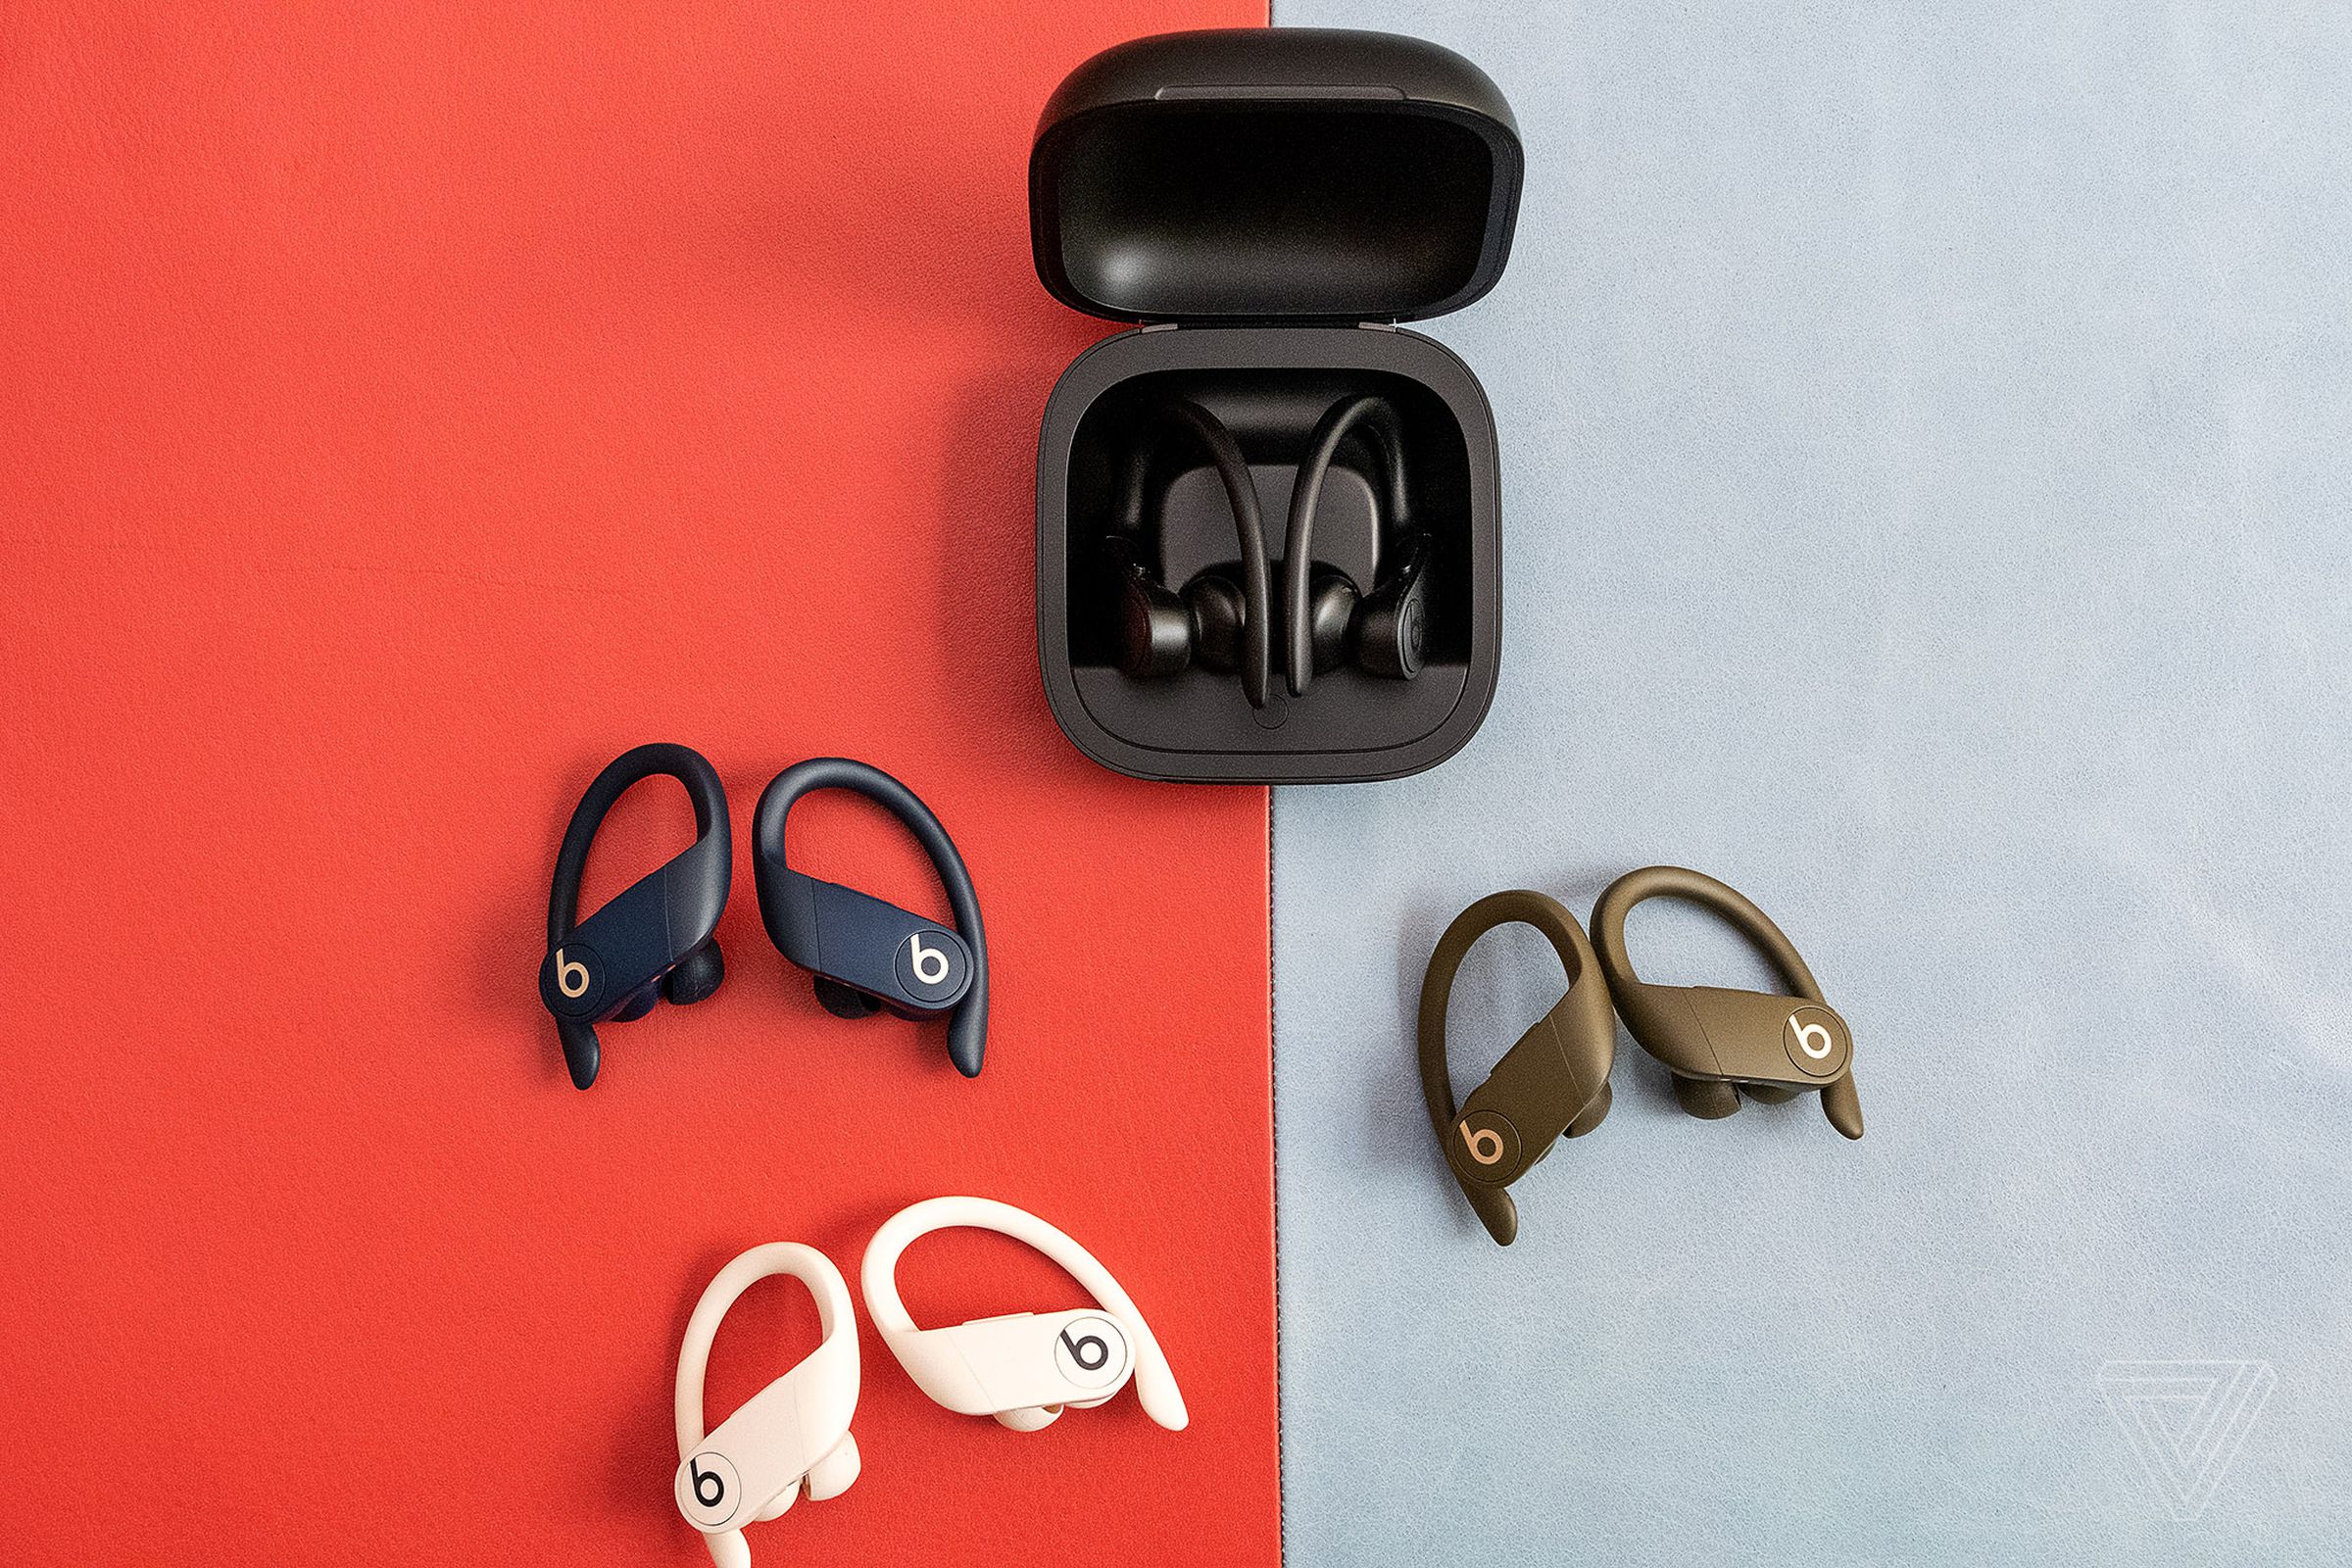 Only the black Powerbeats Pro will be shipping at launch, with the other three colors following later in summer.